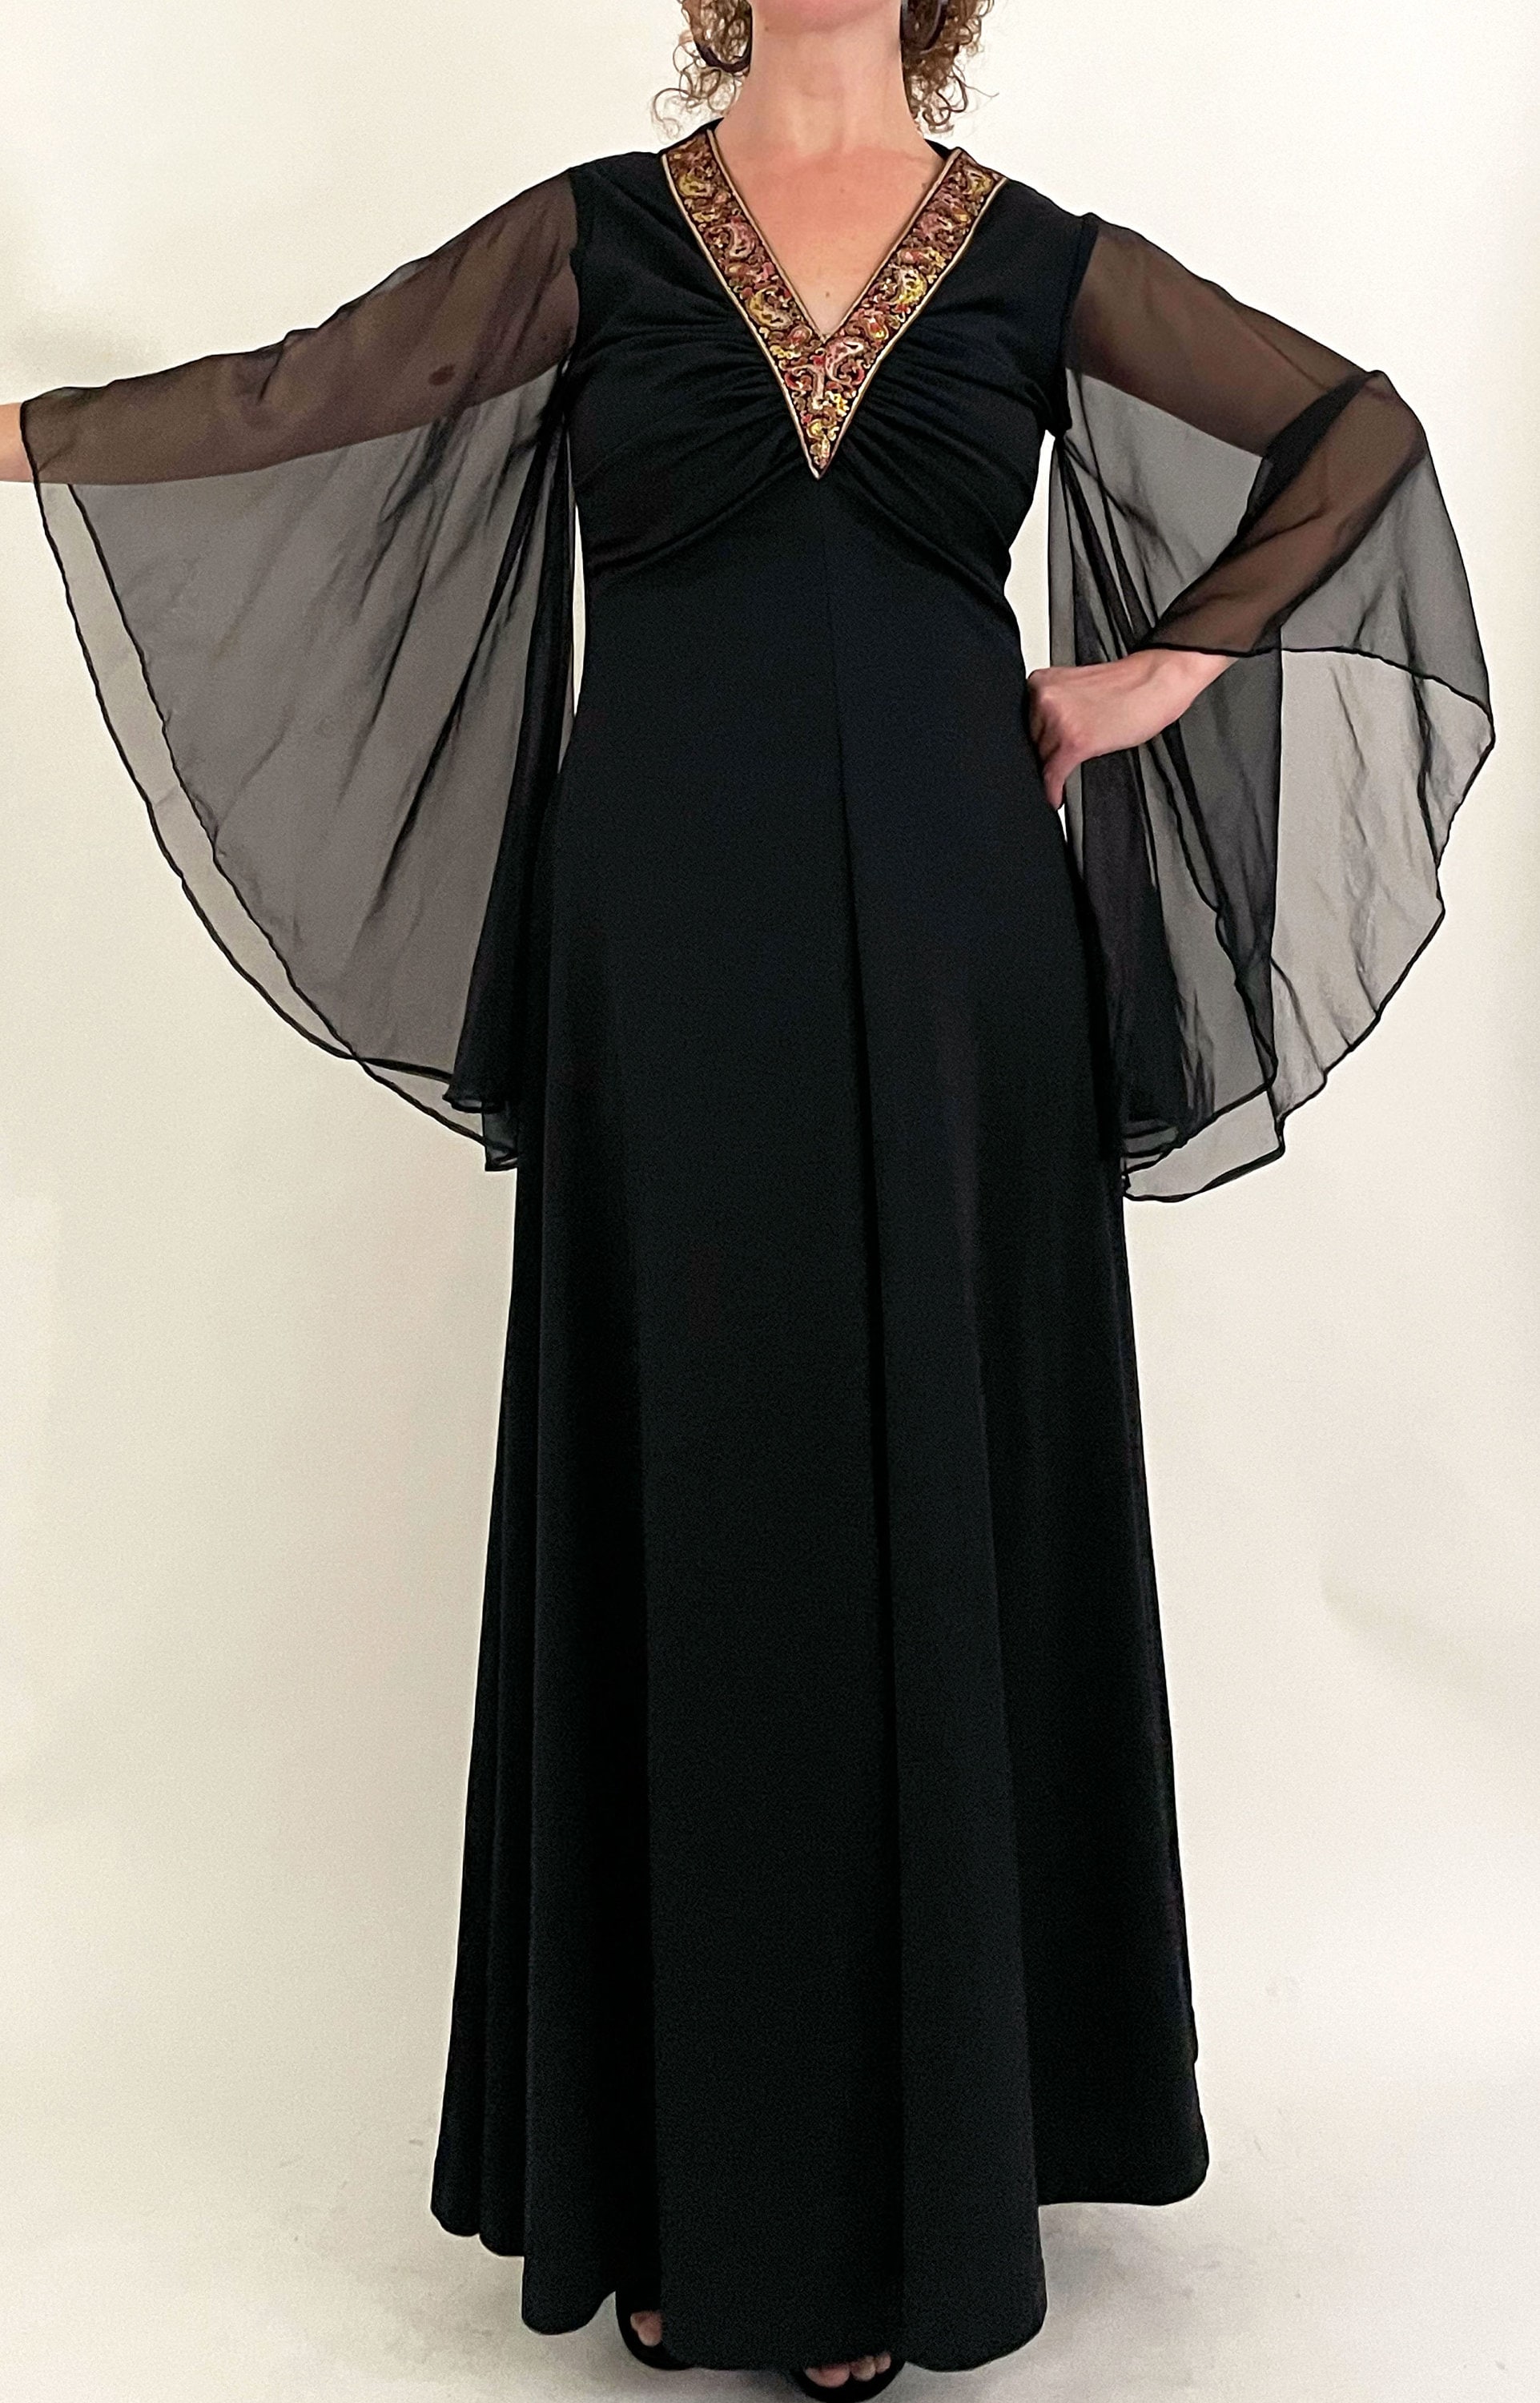 1970s Black Angel Sleeve Gown With Metallic Collar Jersey - Etsy